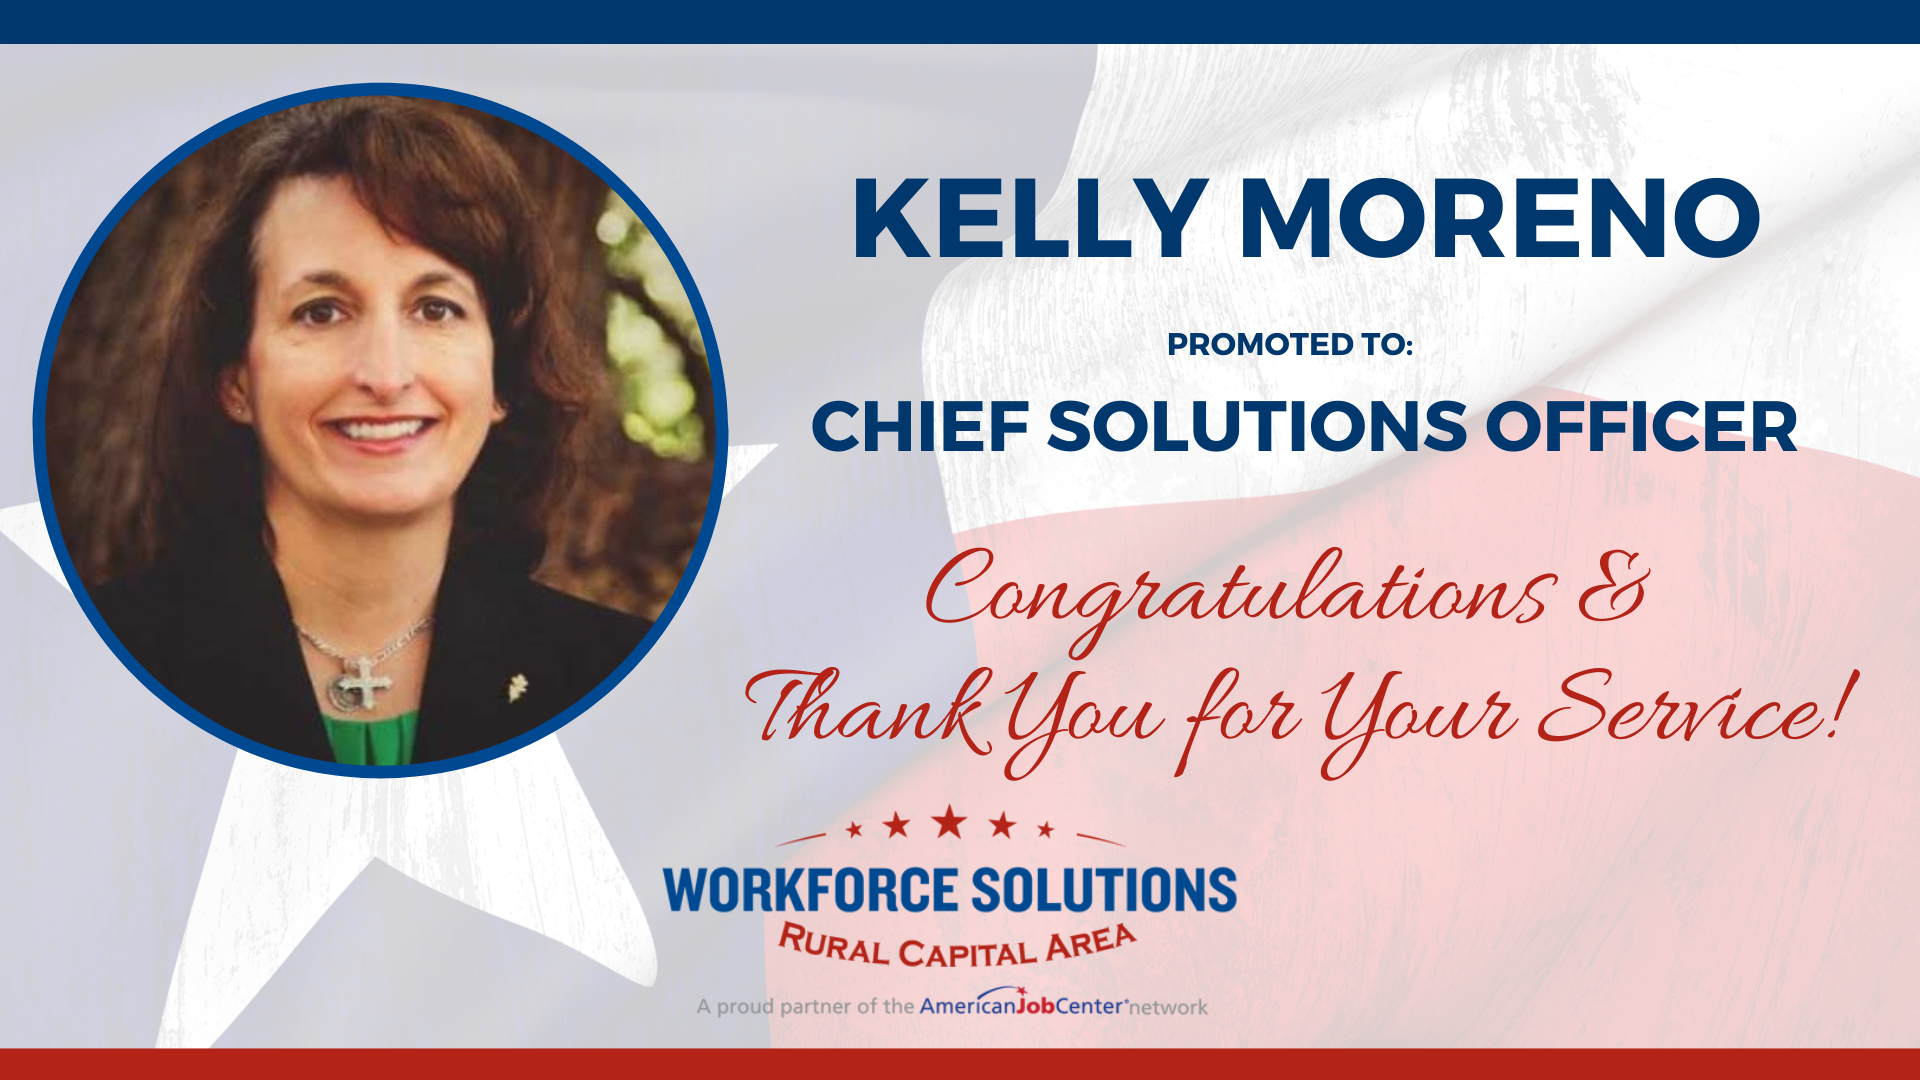 Kelly Moreno Promoted to Chief Solutions Officer for Workforce Solutions Rural Capital Area